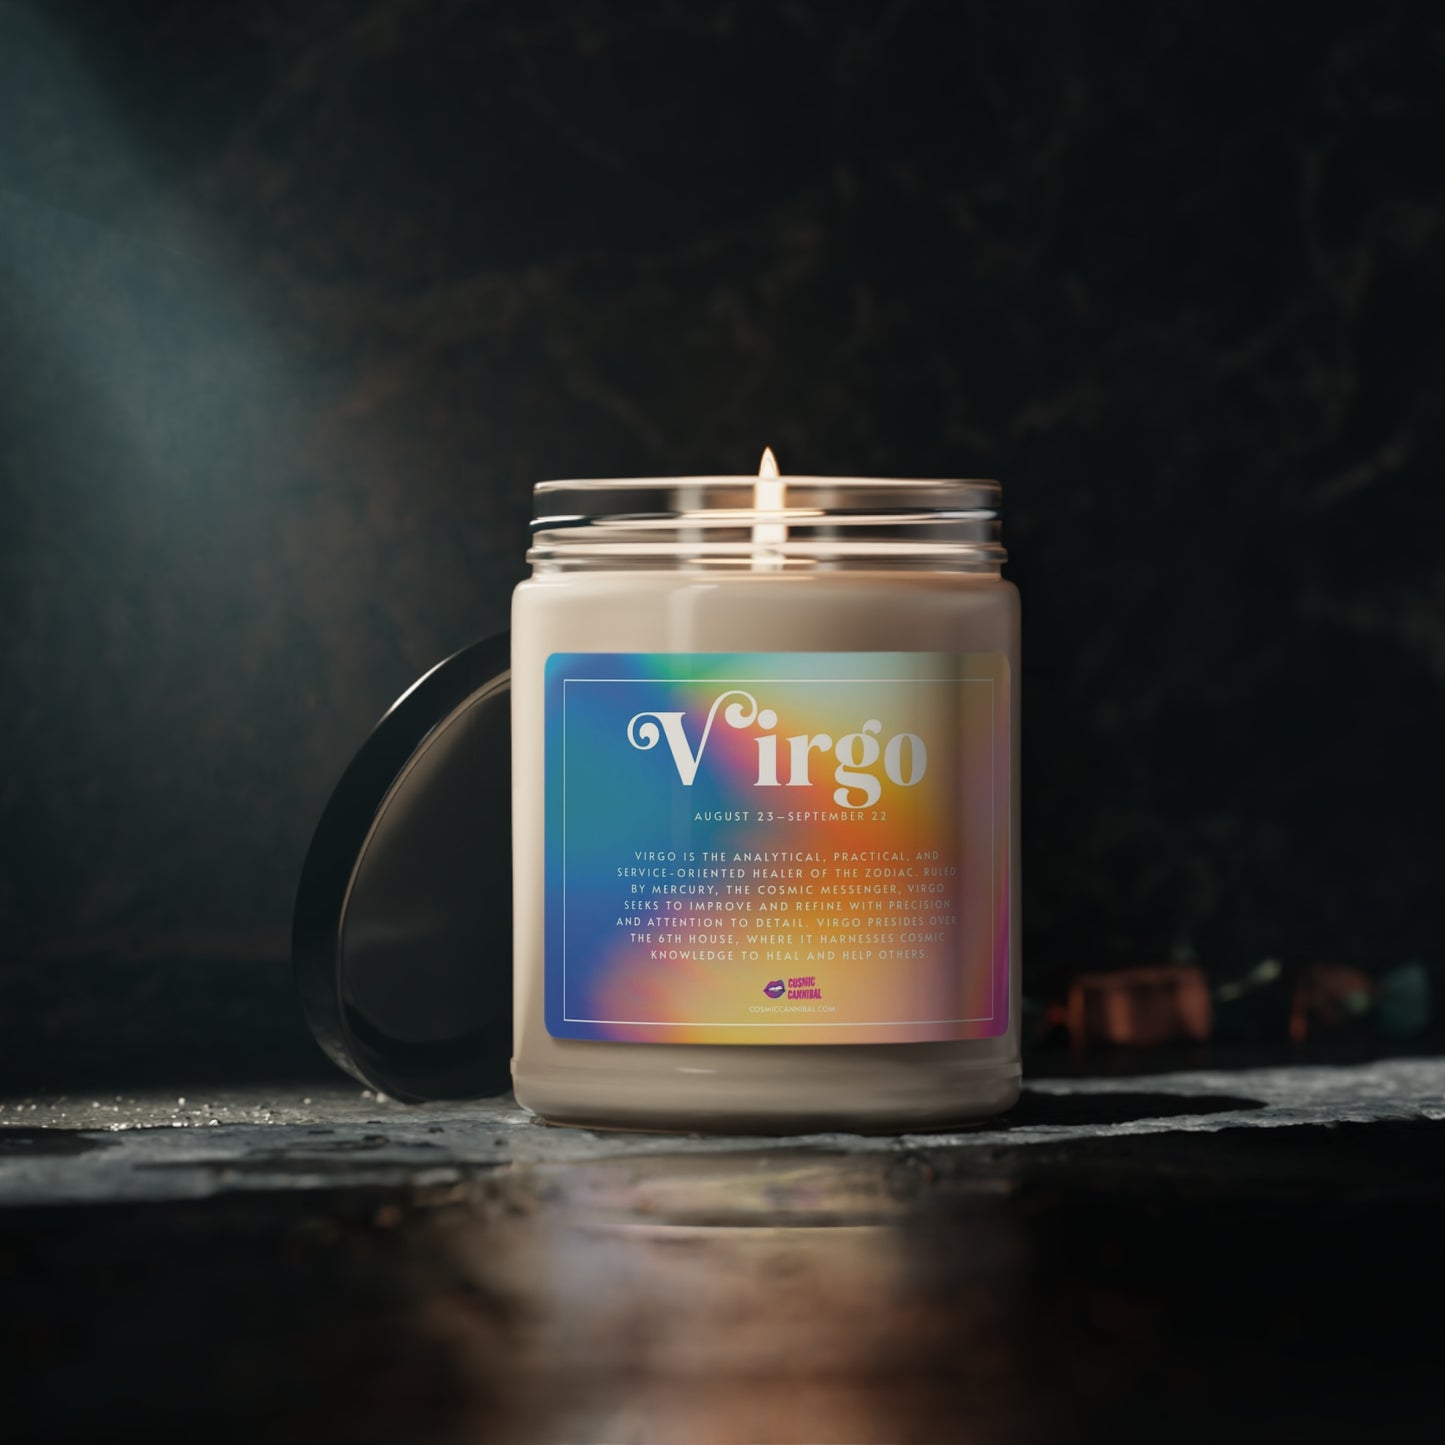 The Virgo Candle